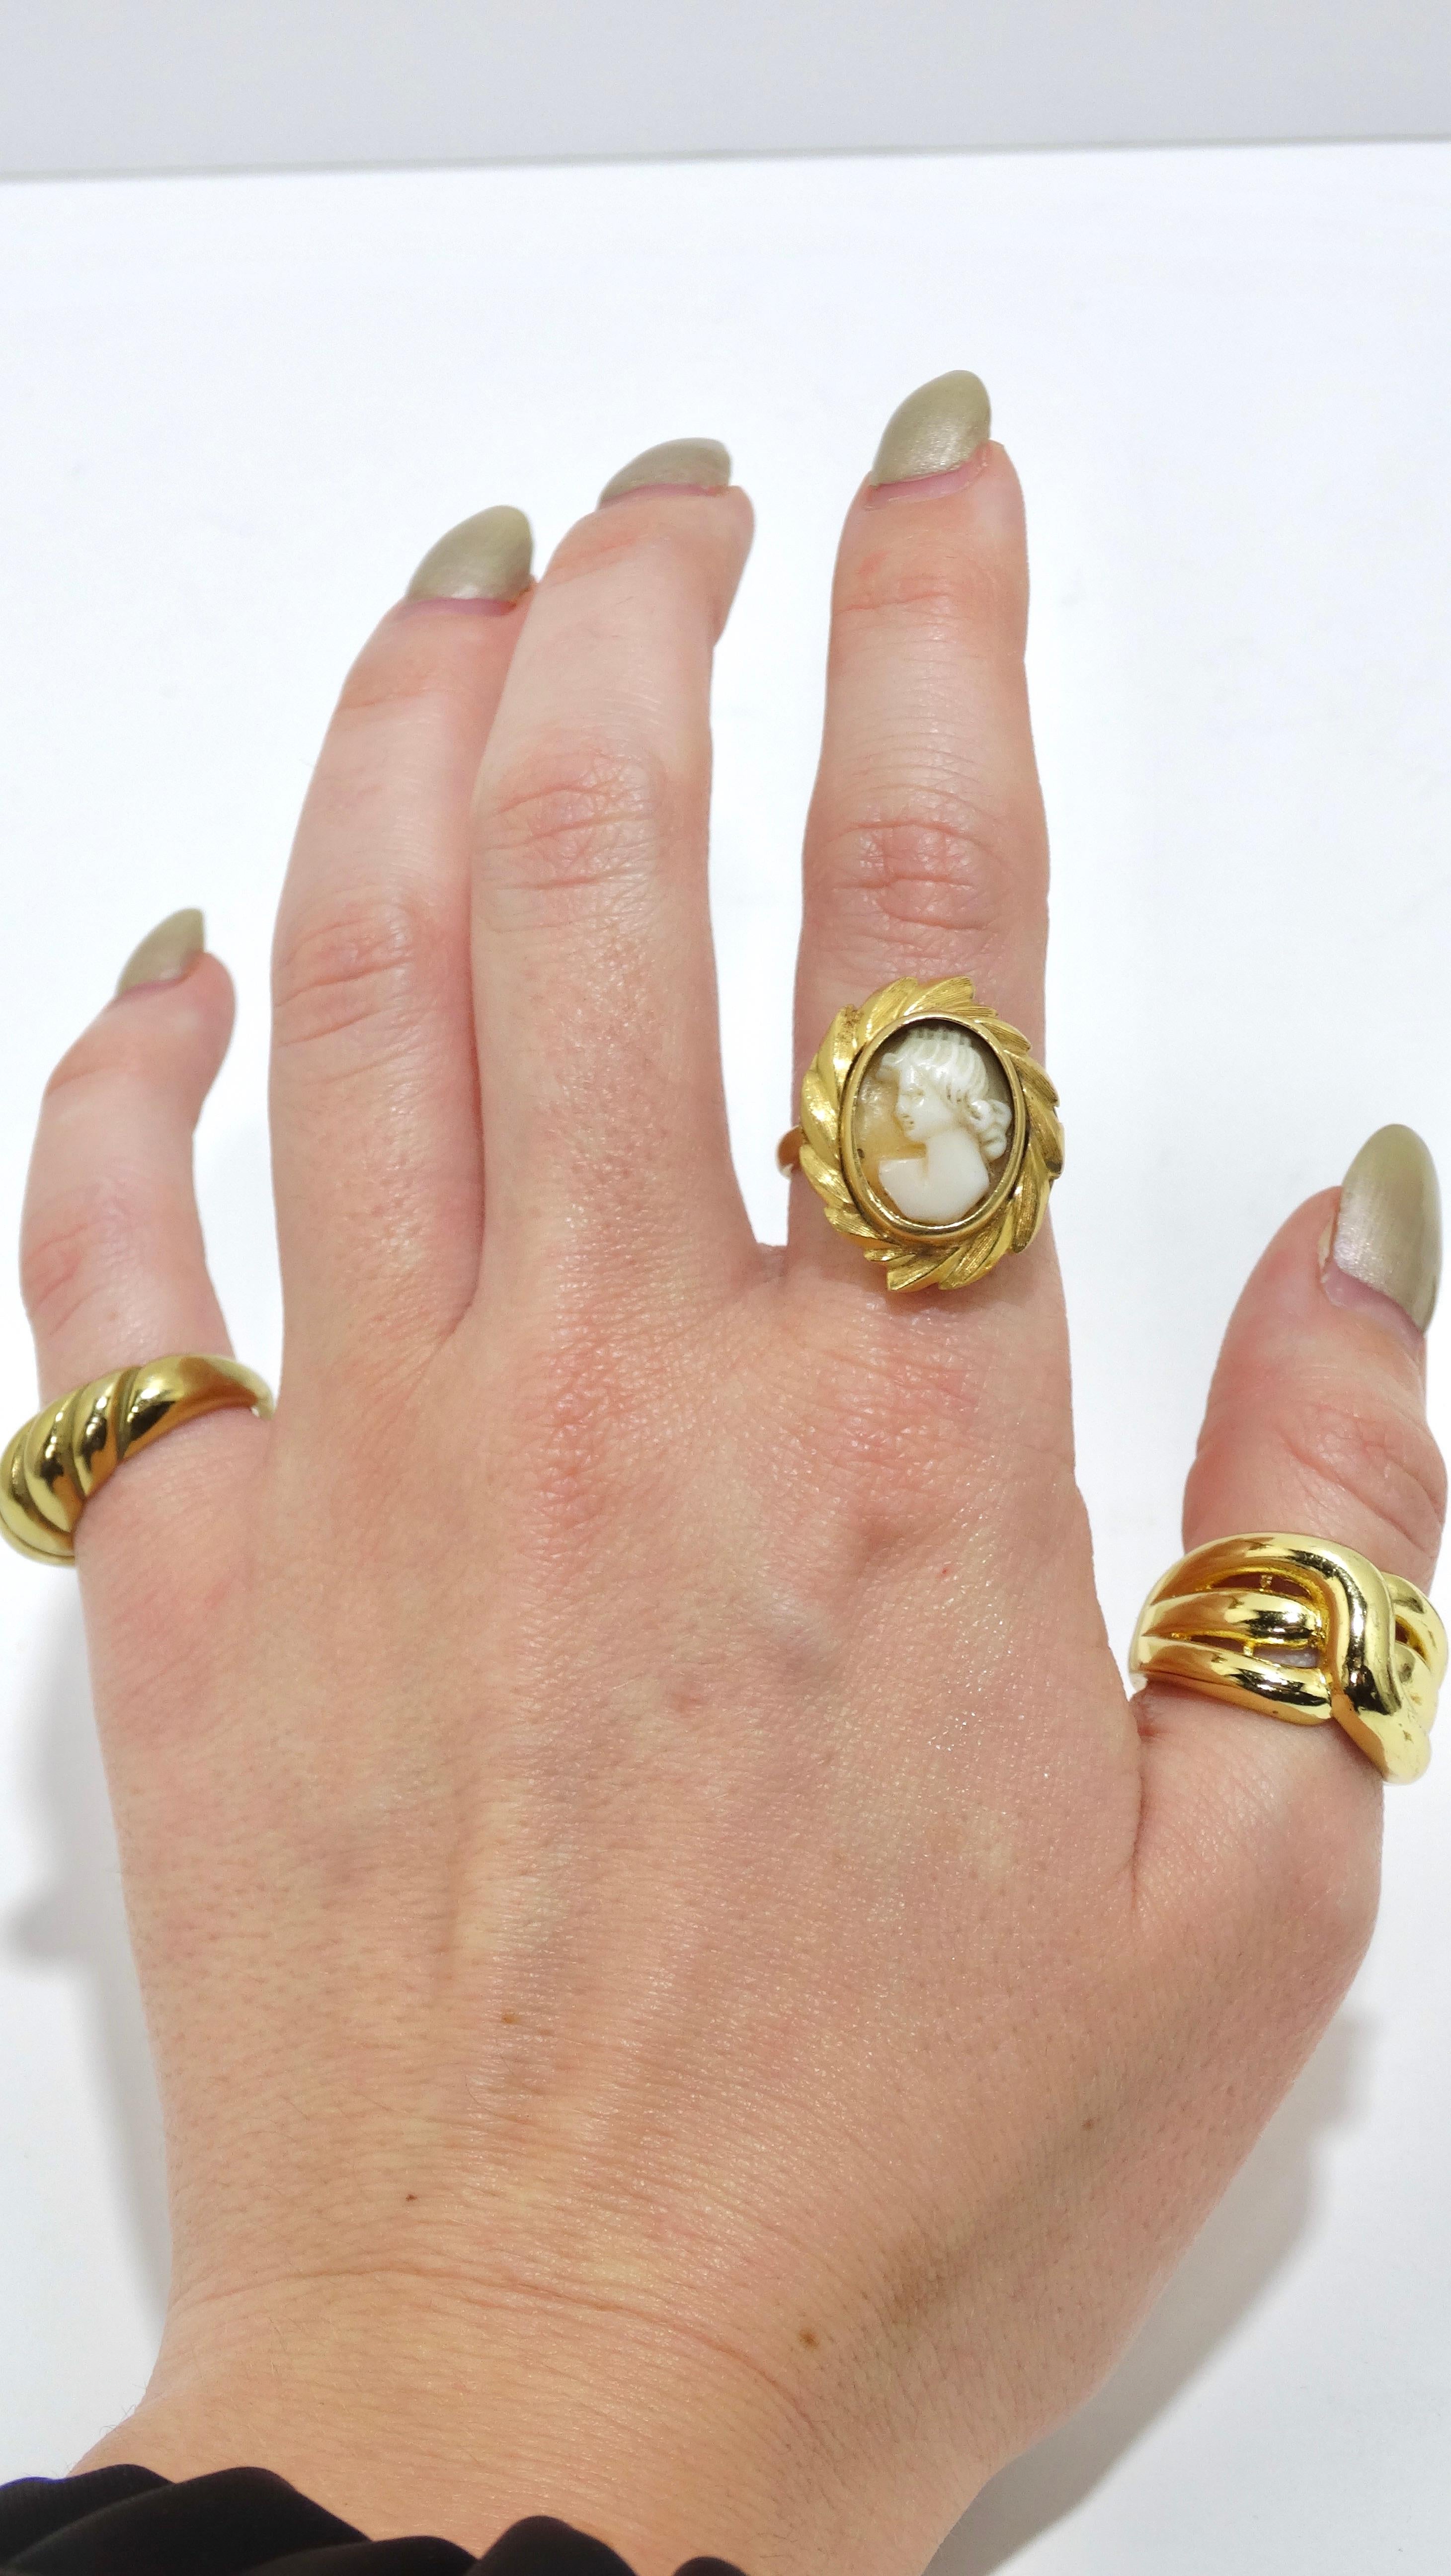 Pick a gem right out of the 1920's. This is an exquisite ring with a lady figure carved out of white agate surrounded by 18k gold. Add a sense of beauty and elegance to your jewelry collection and pair with more modern touches like Cartier rings and